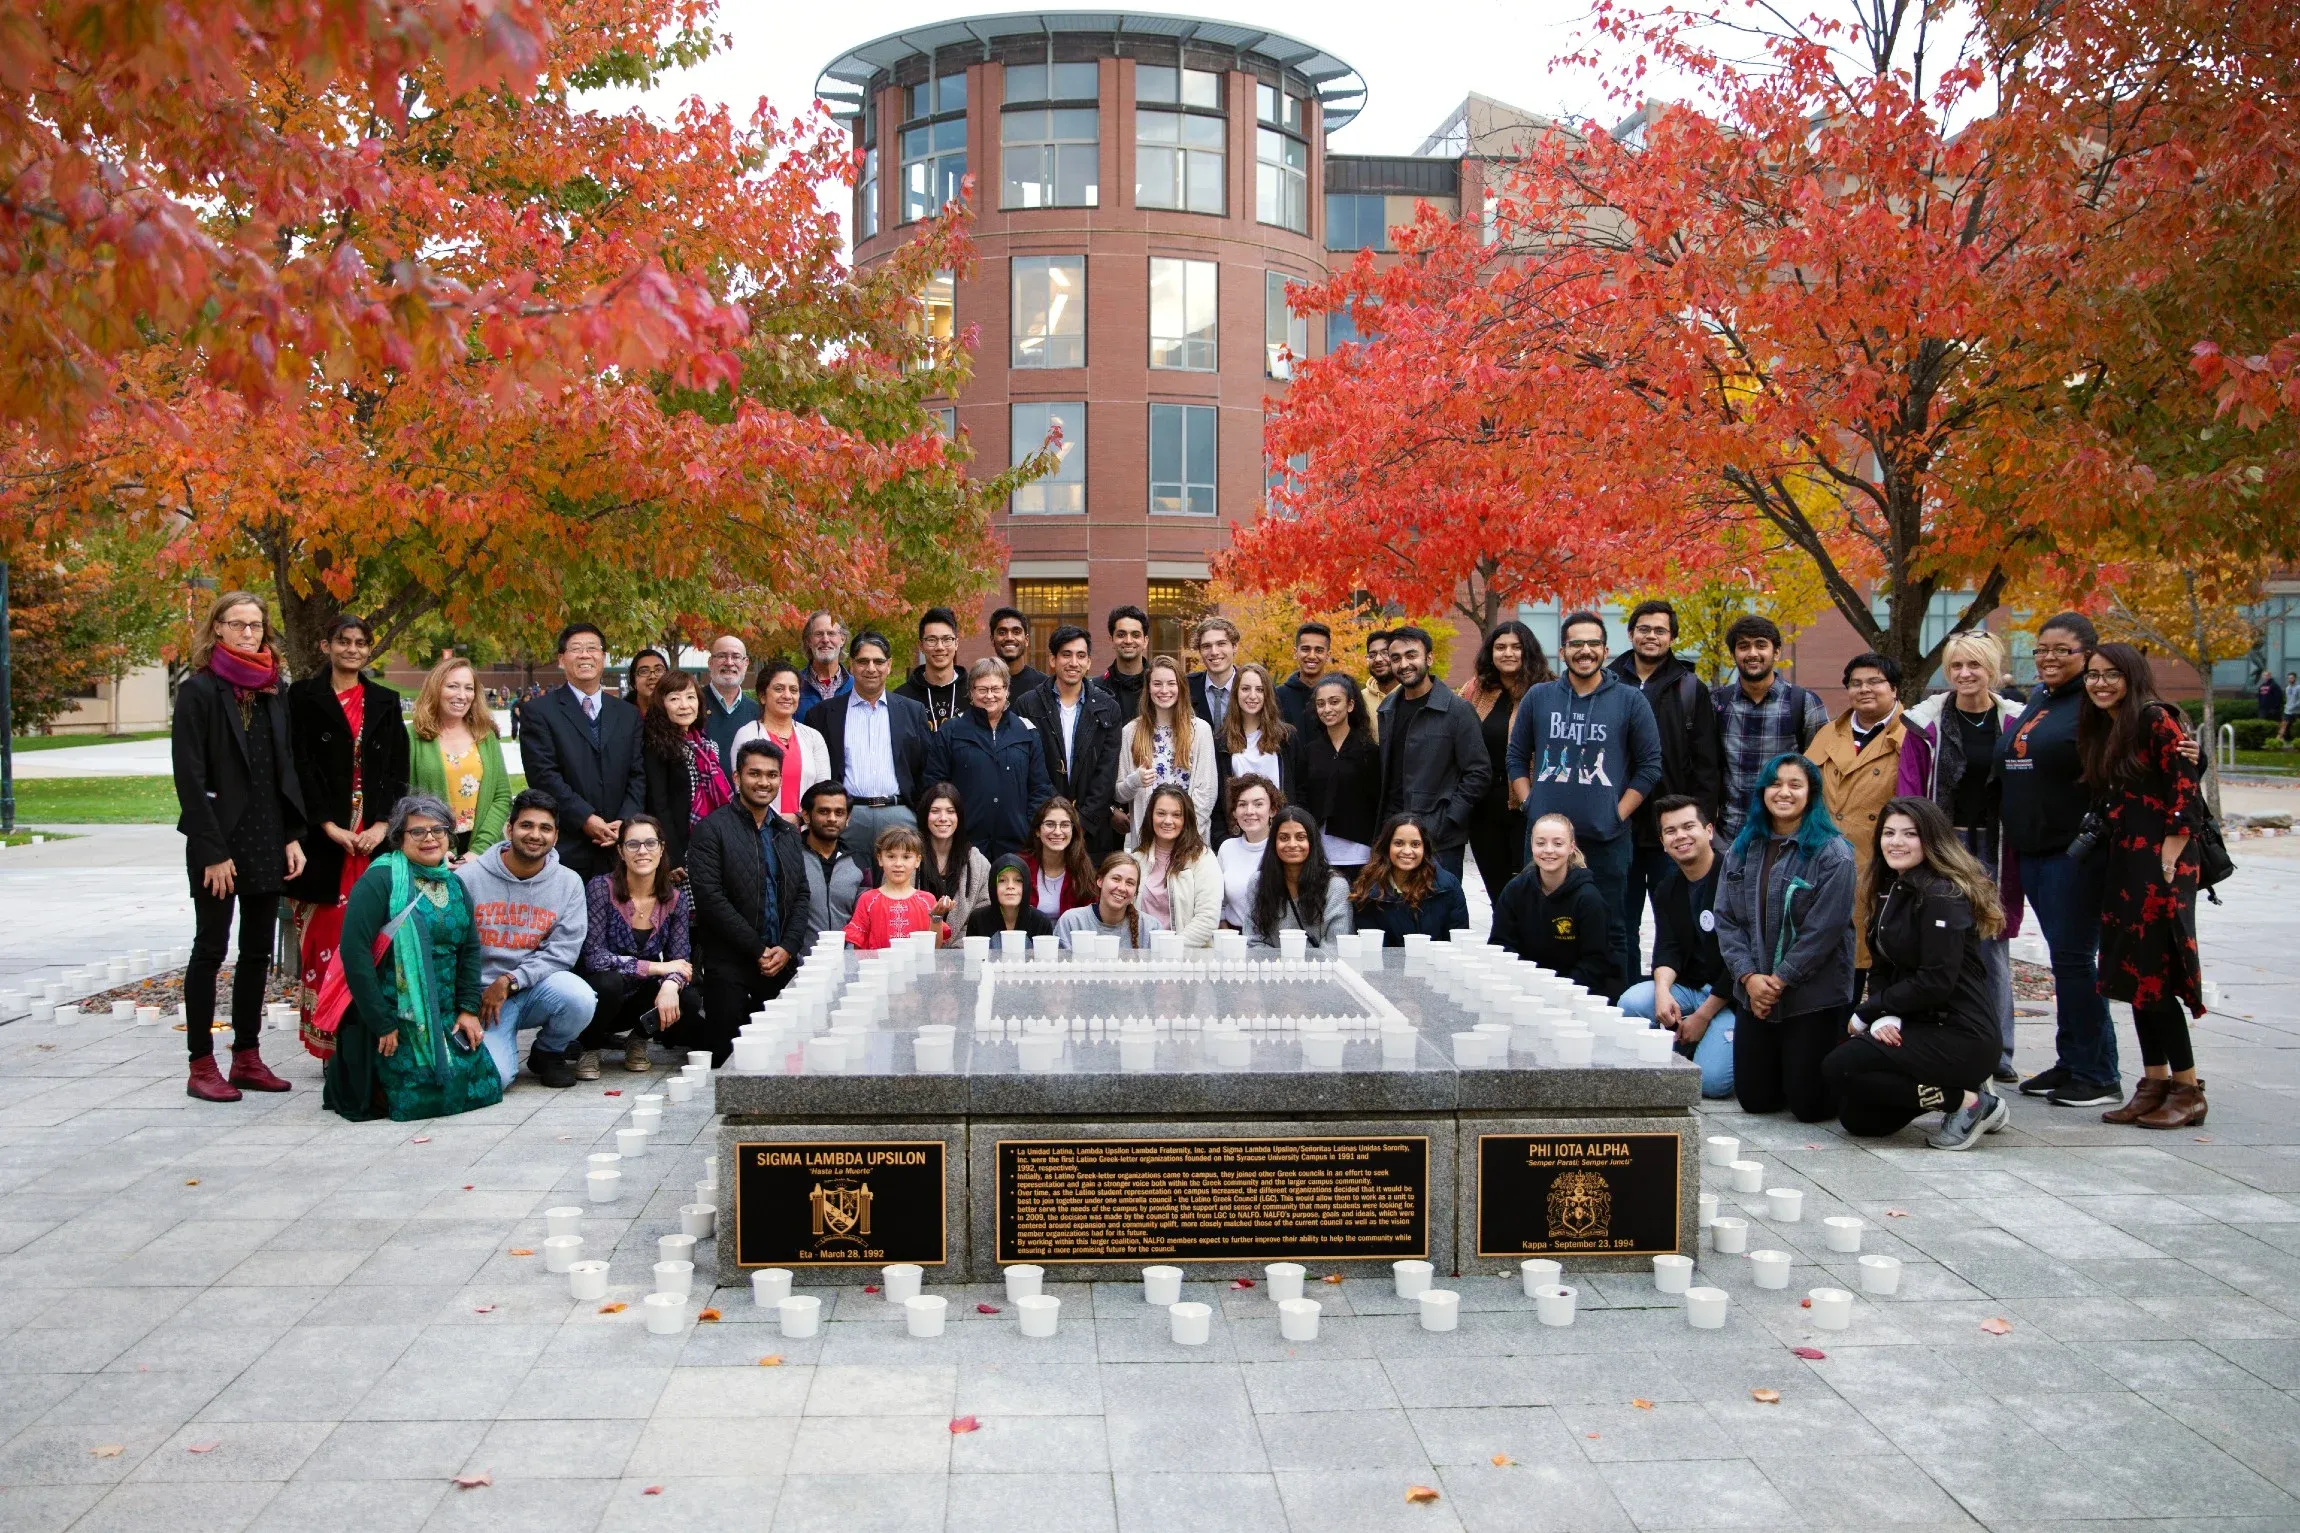 Group shot of people on campus celebrating Diwali, with candles in front of them and fall foliage behind.